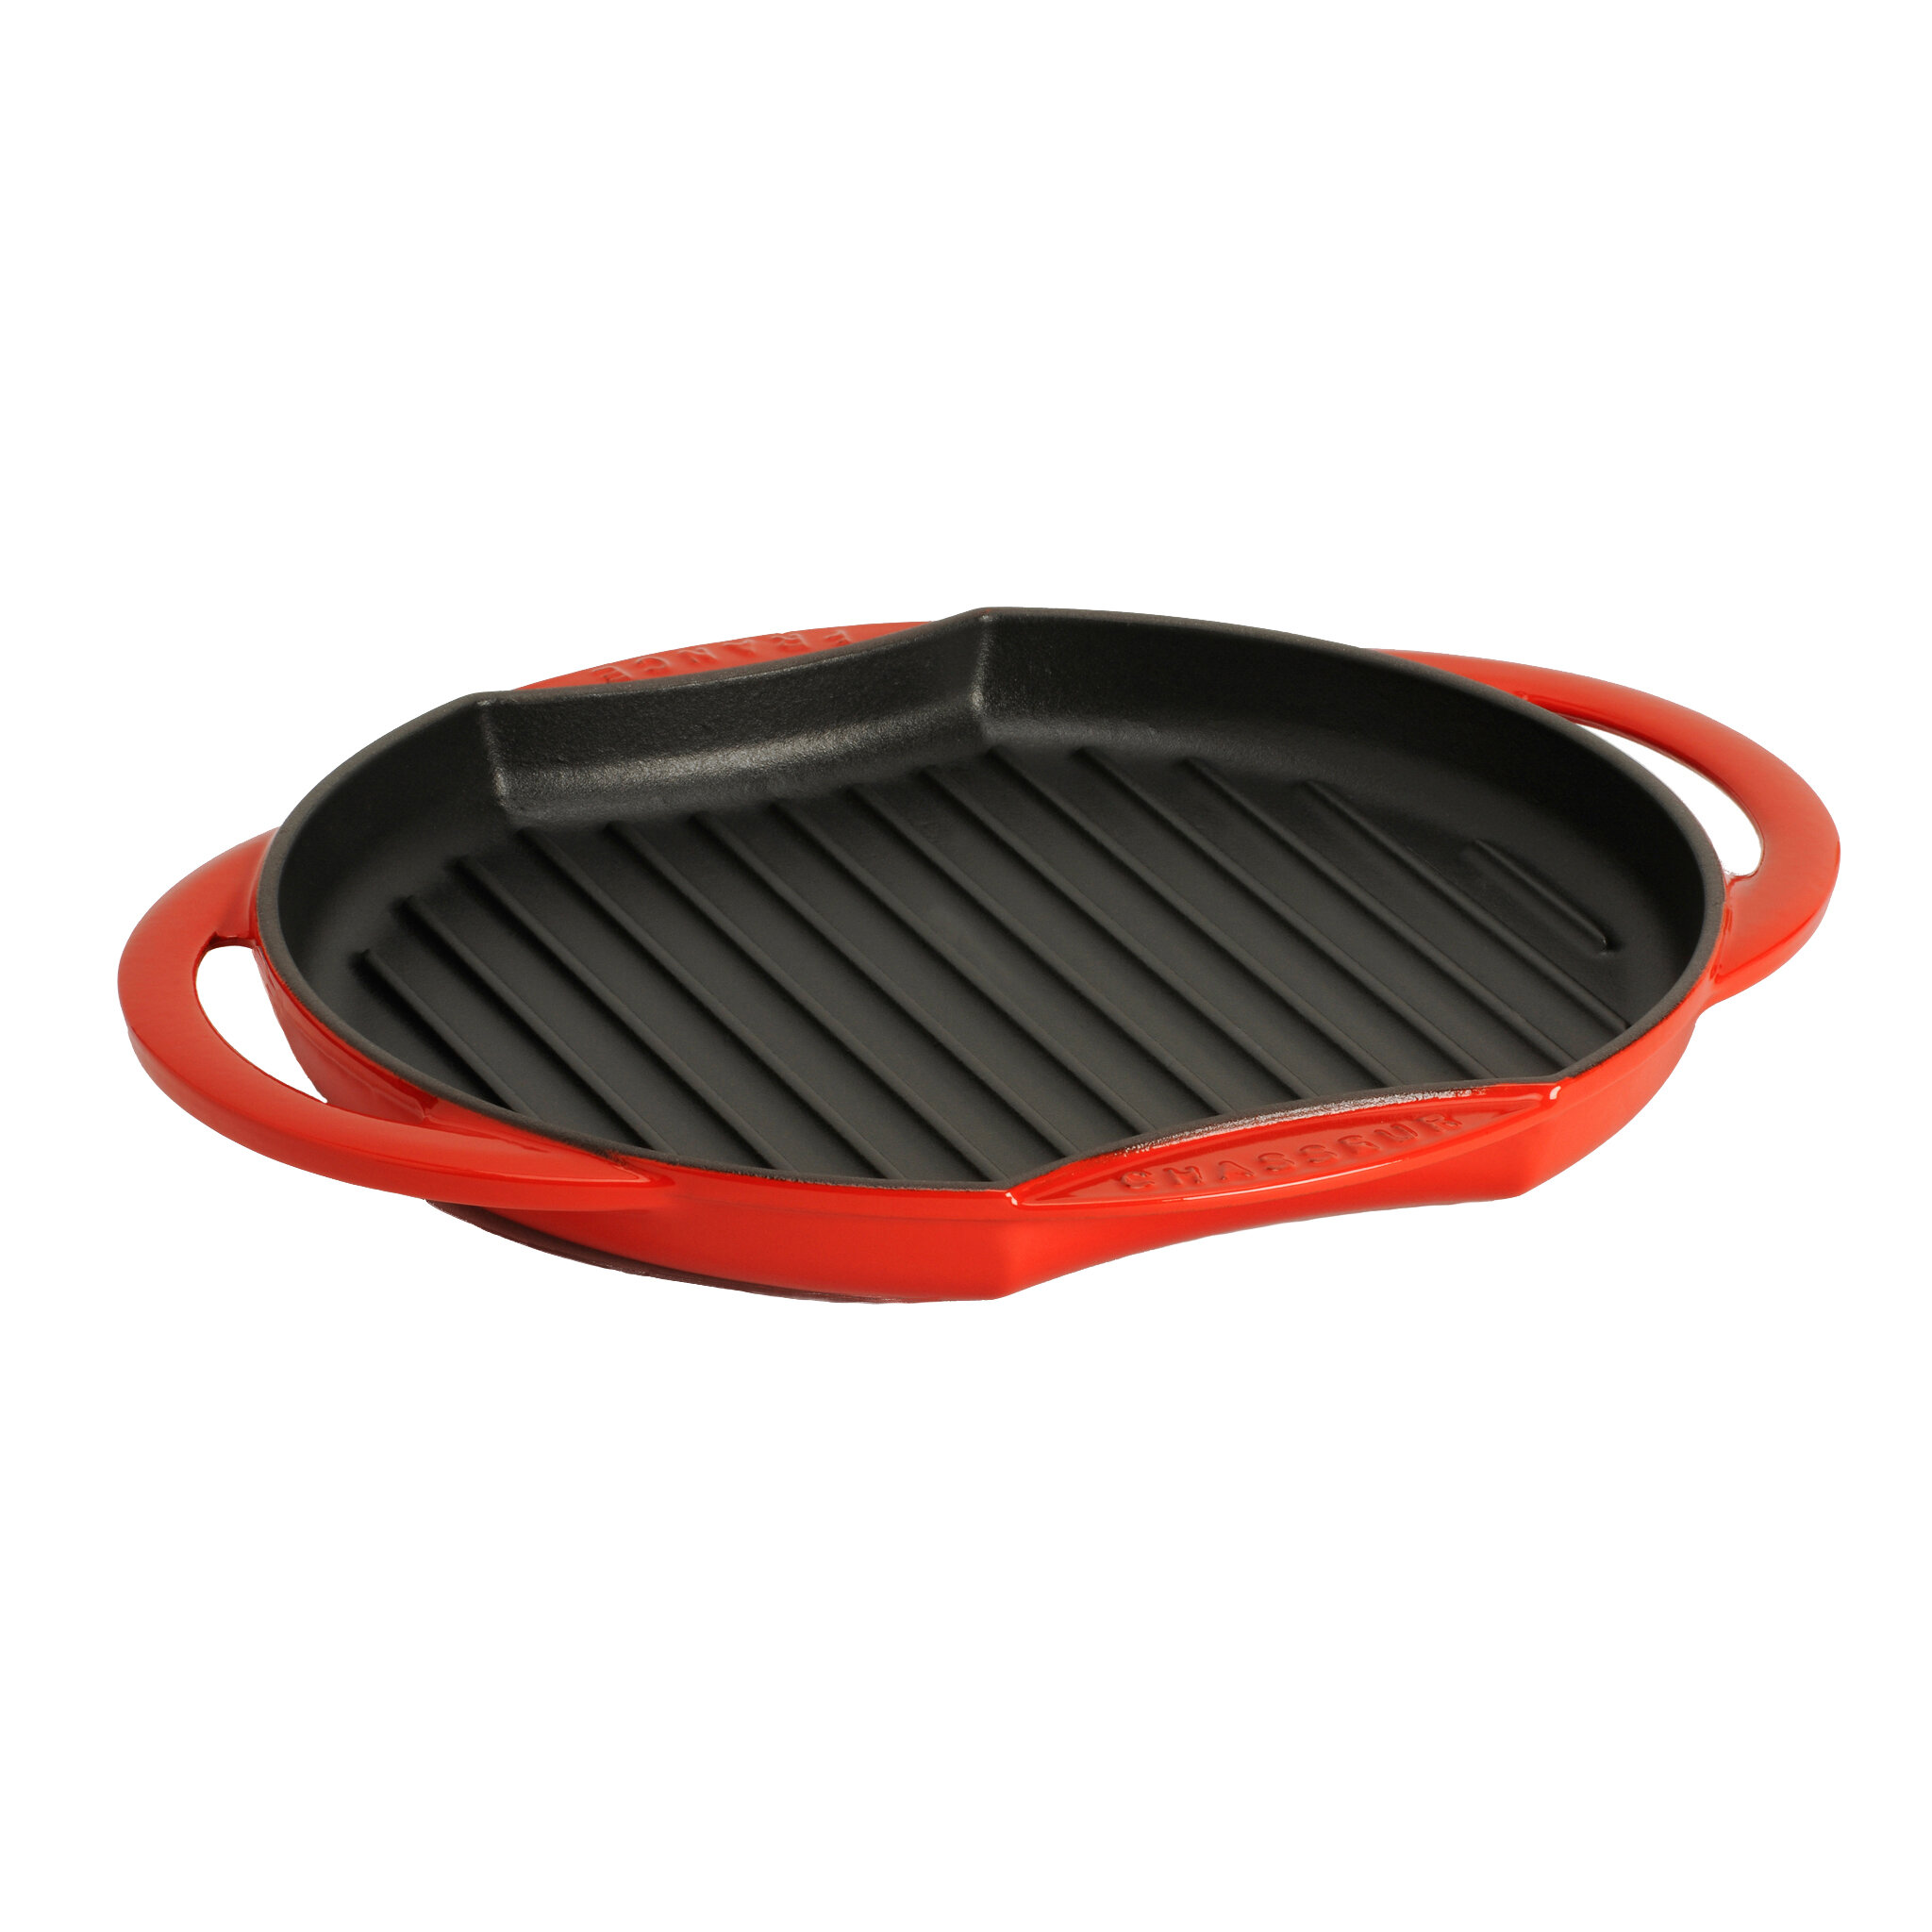 Chasseur French Rectangular Enameled Cast Iron 12 Grill Pan - Red